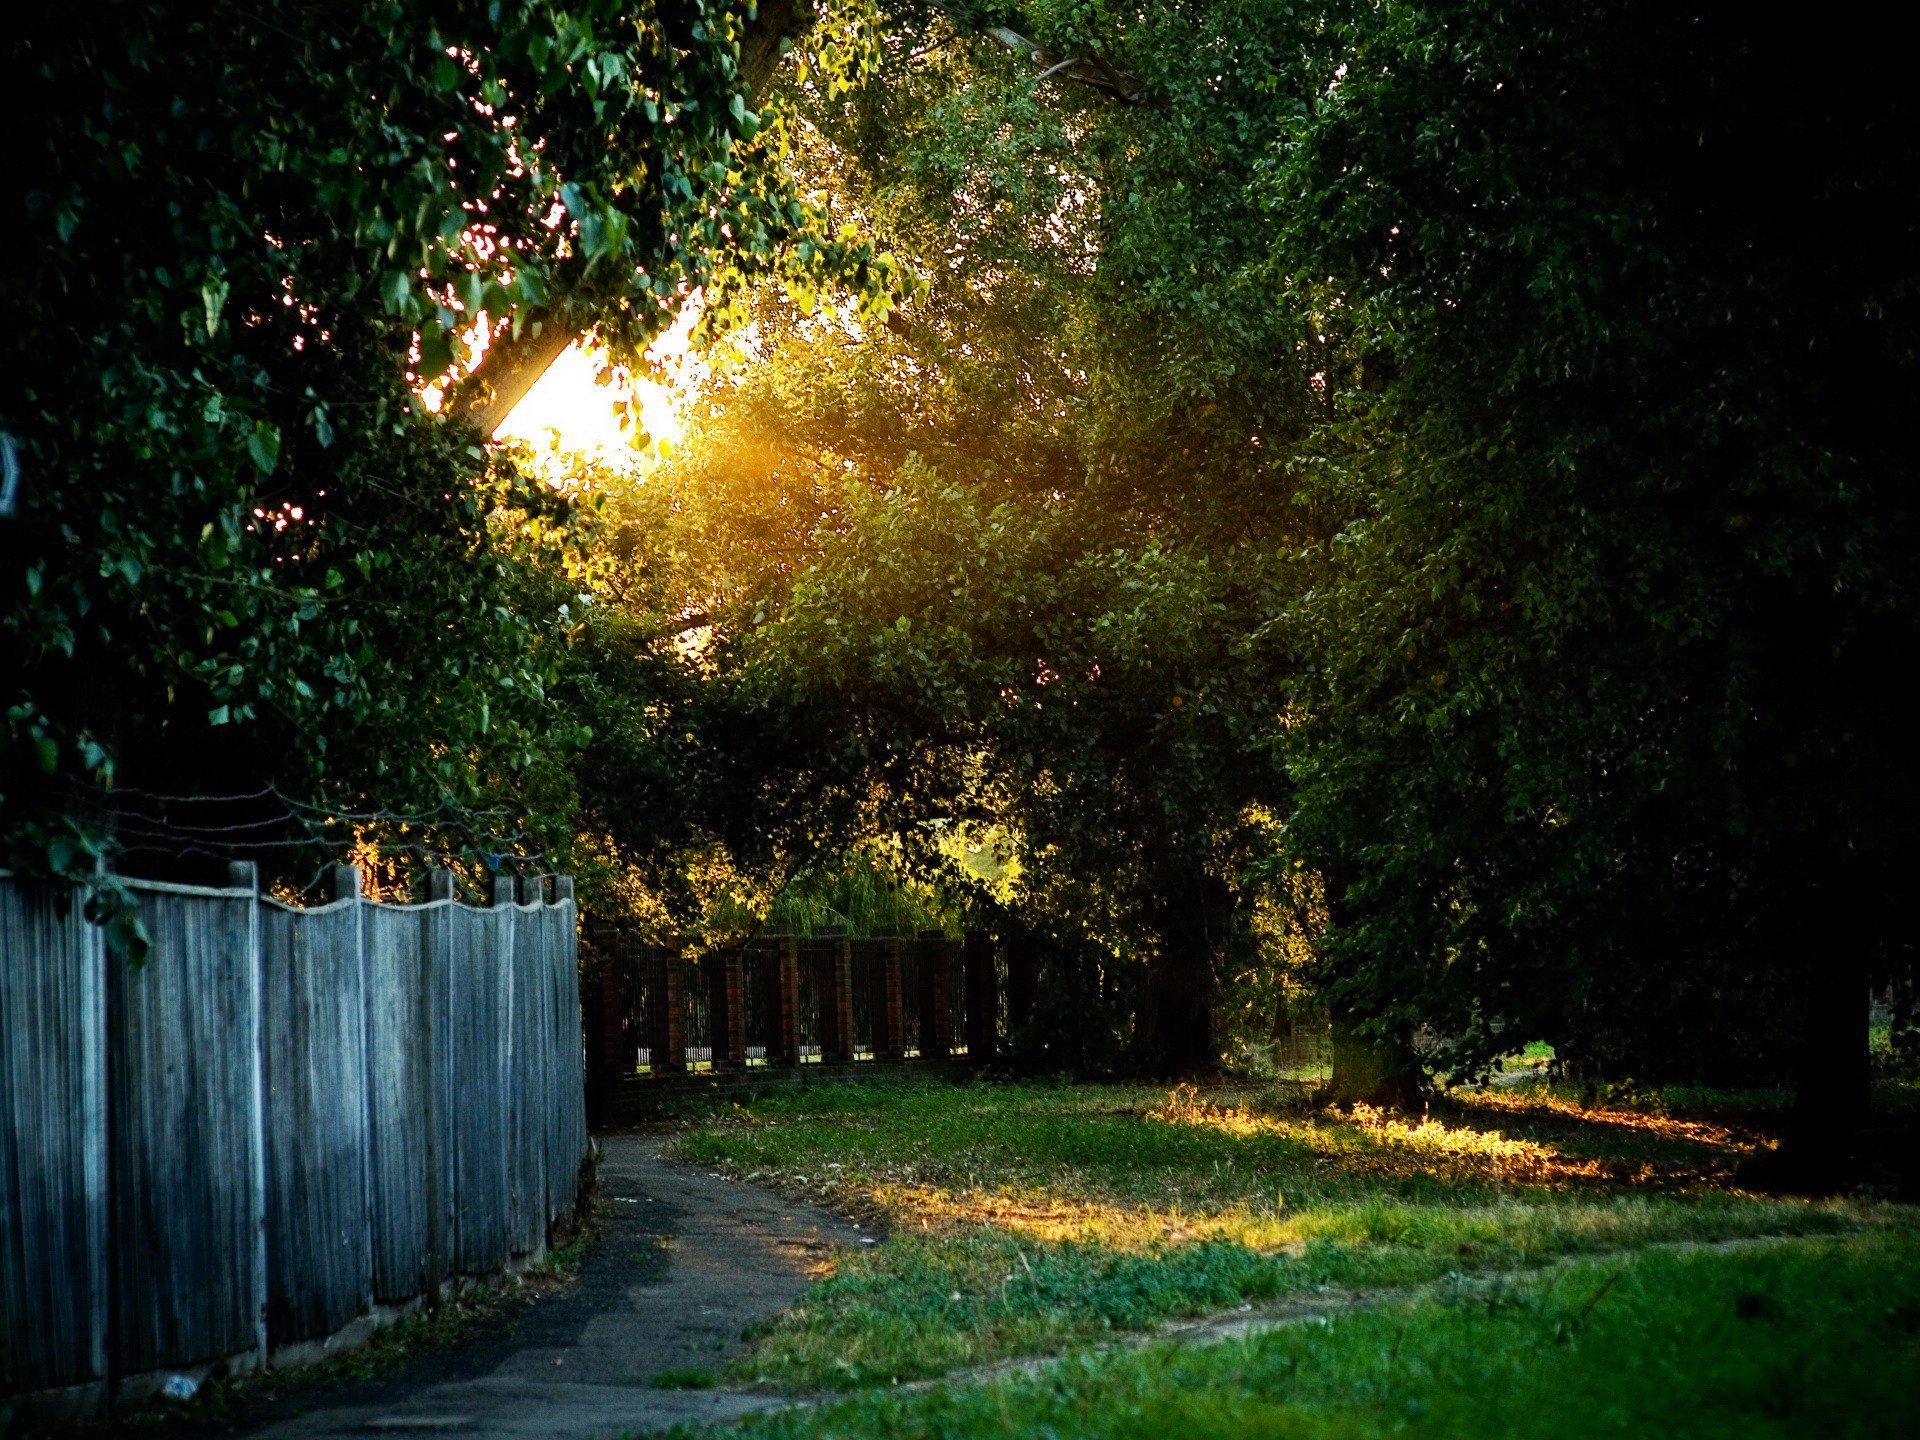 courtyard, enclosure, wire, nature, trees, shine, light, path, fence, trail, fencing, yard